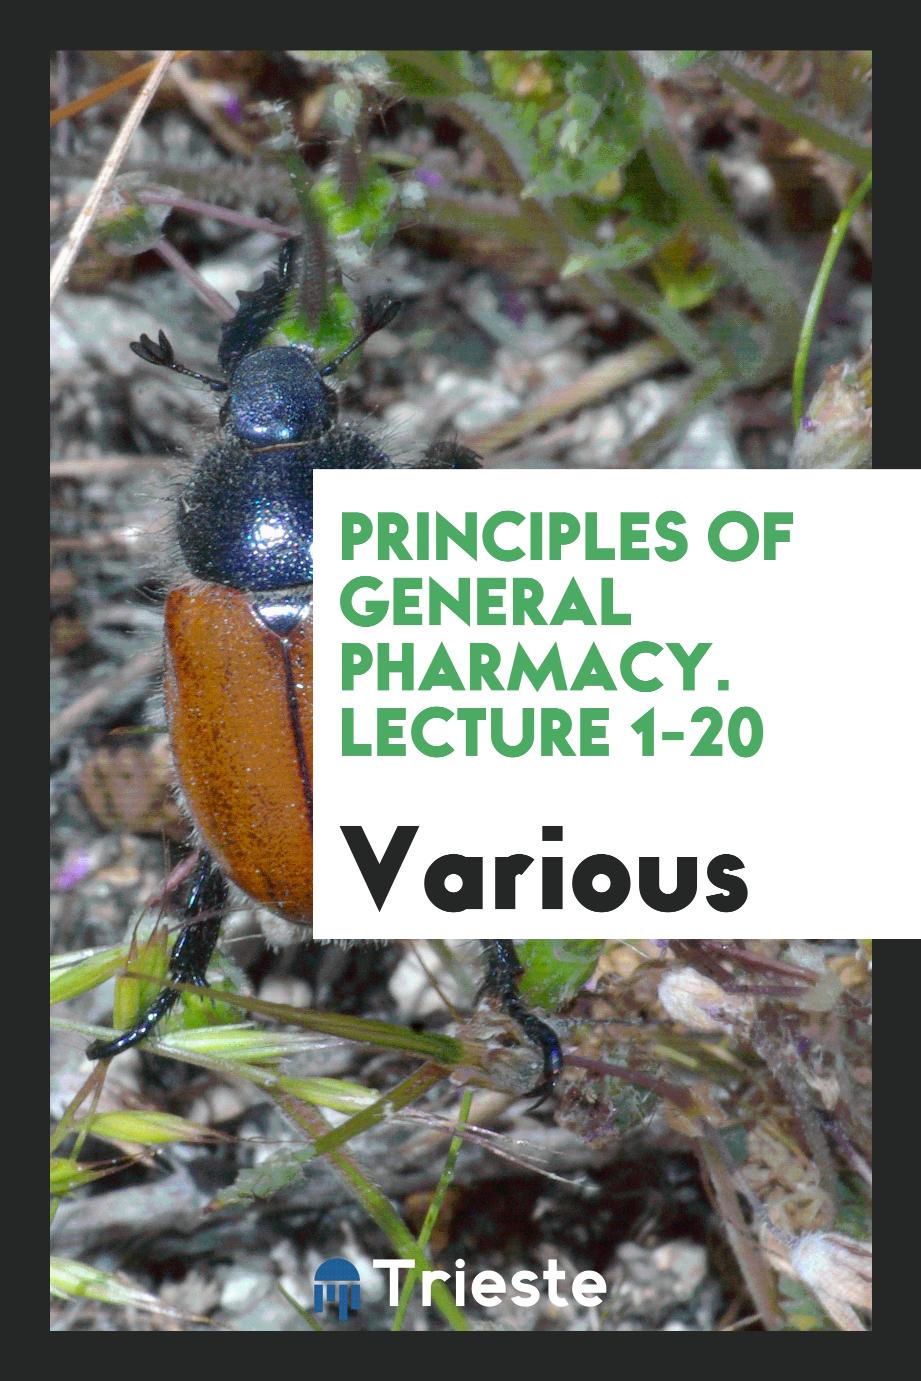 Principles of General Pharmacy. Lecture 1-20